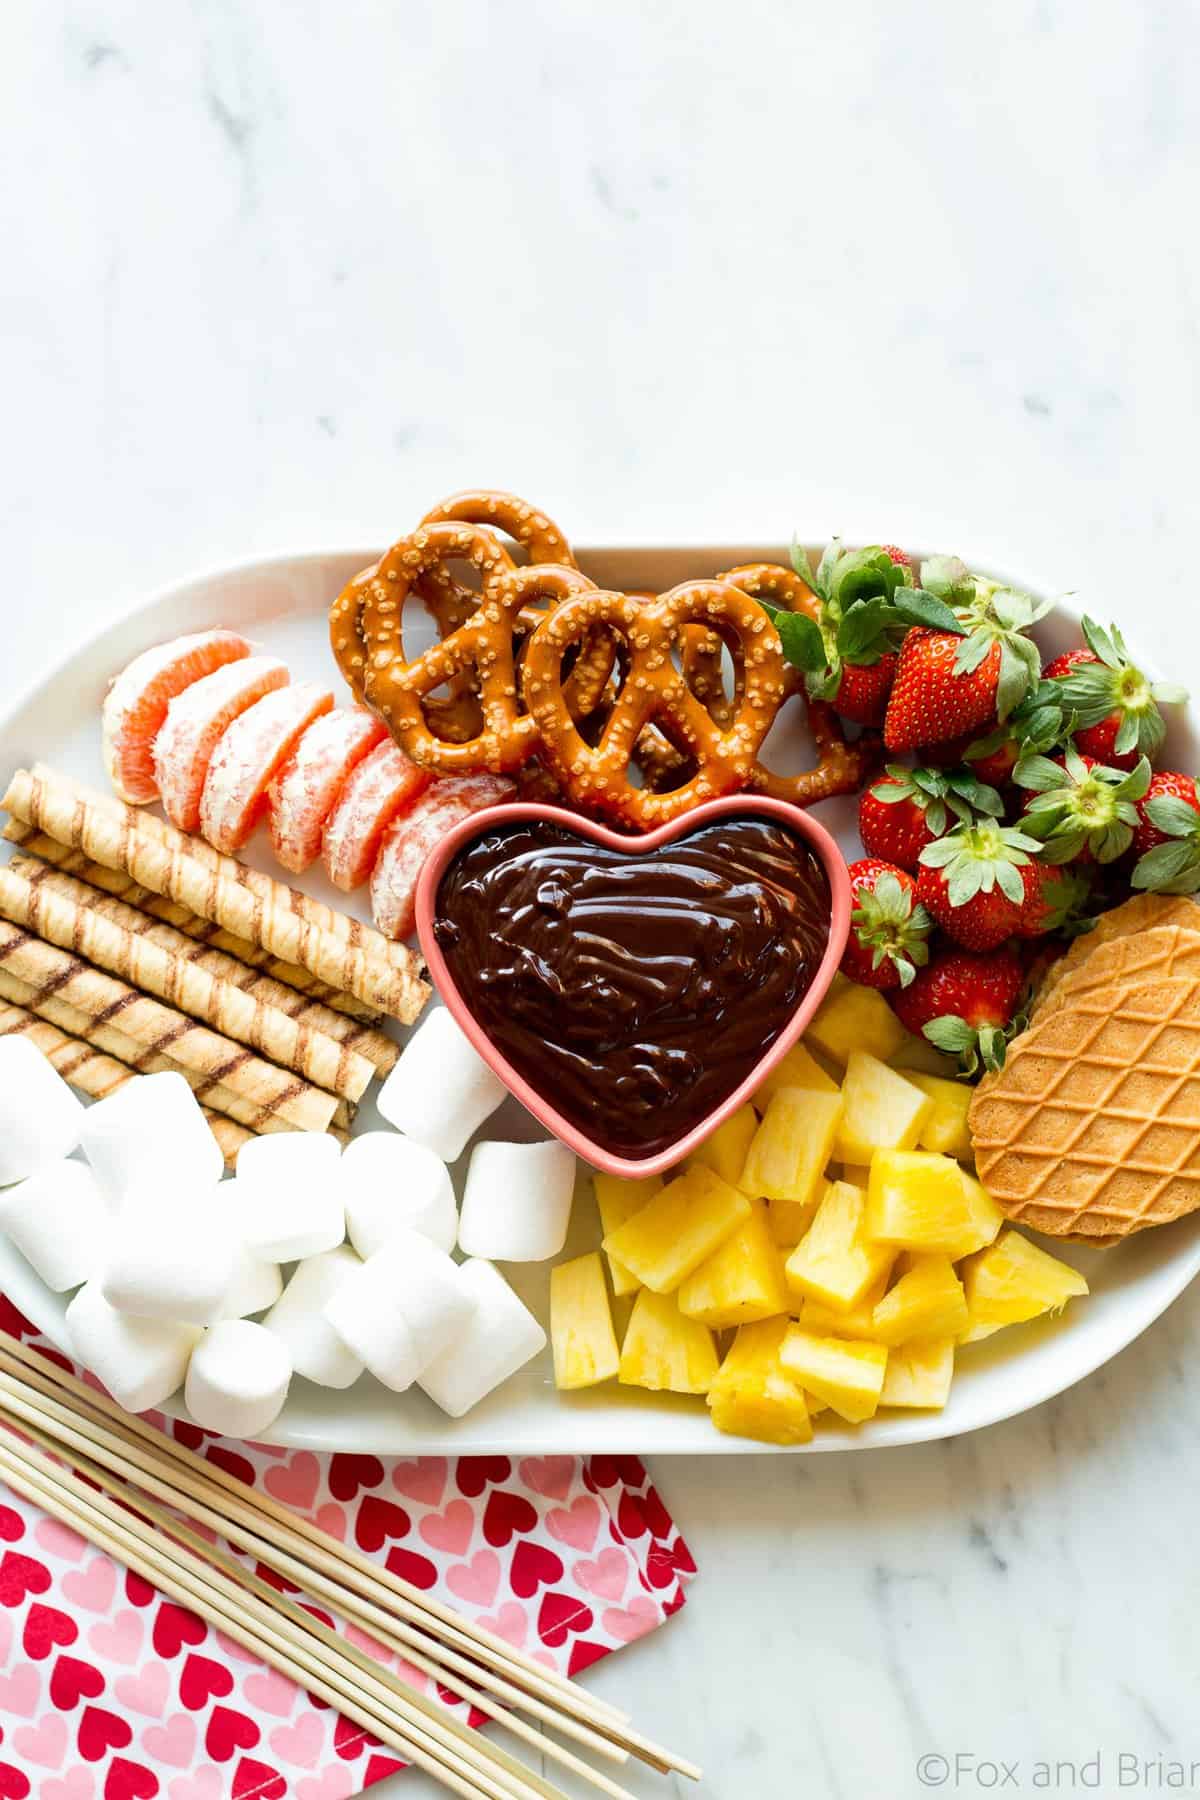 This easy chocolate fondue is a fun dessert for a romantic valentine's day dinner or party. It is rich and chocolaty and doesn't even require a fondue pot!